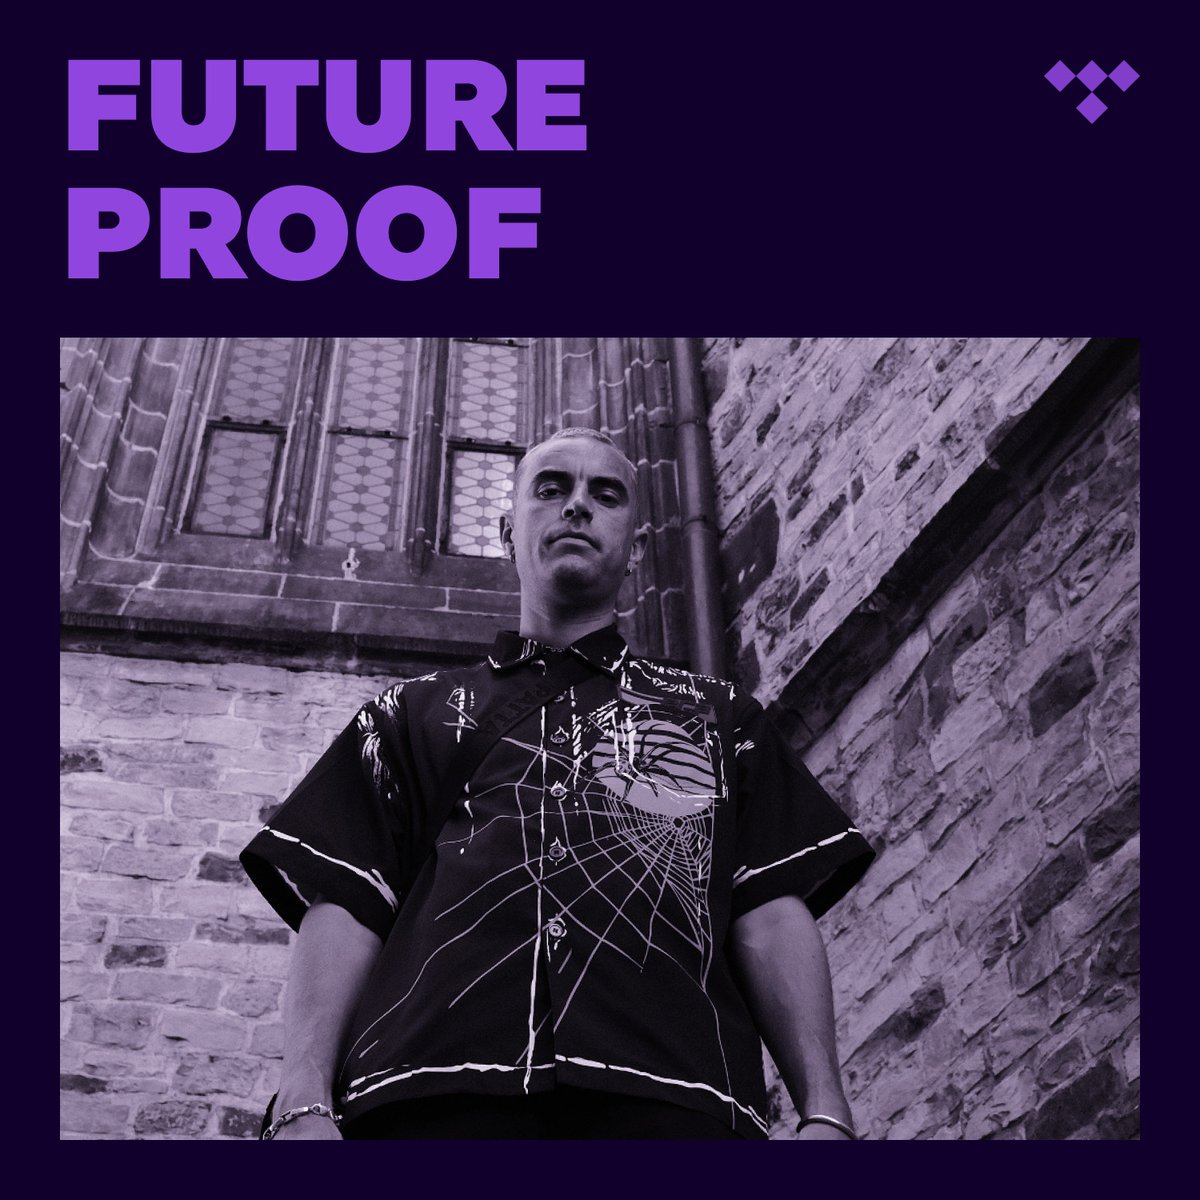 On the cover of @TIDAL's 'Future Proof' playlist this week @AlixPerez [@1985Music1985] who has just dropped his latest single 'Militia' feat. @BigFlowdan 💣 #NewMusicFriday @labelworx tidal.com/browse/playlis…